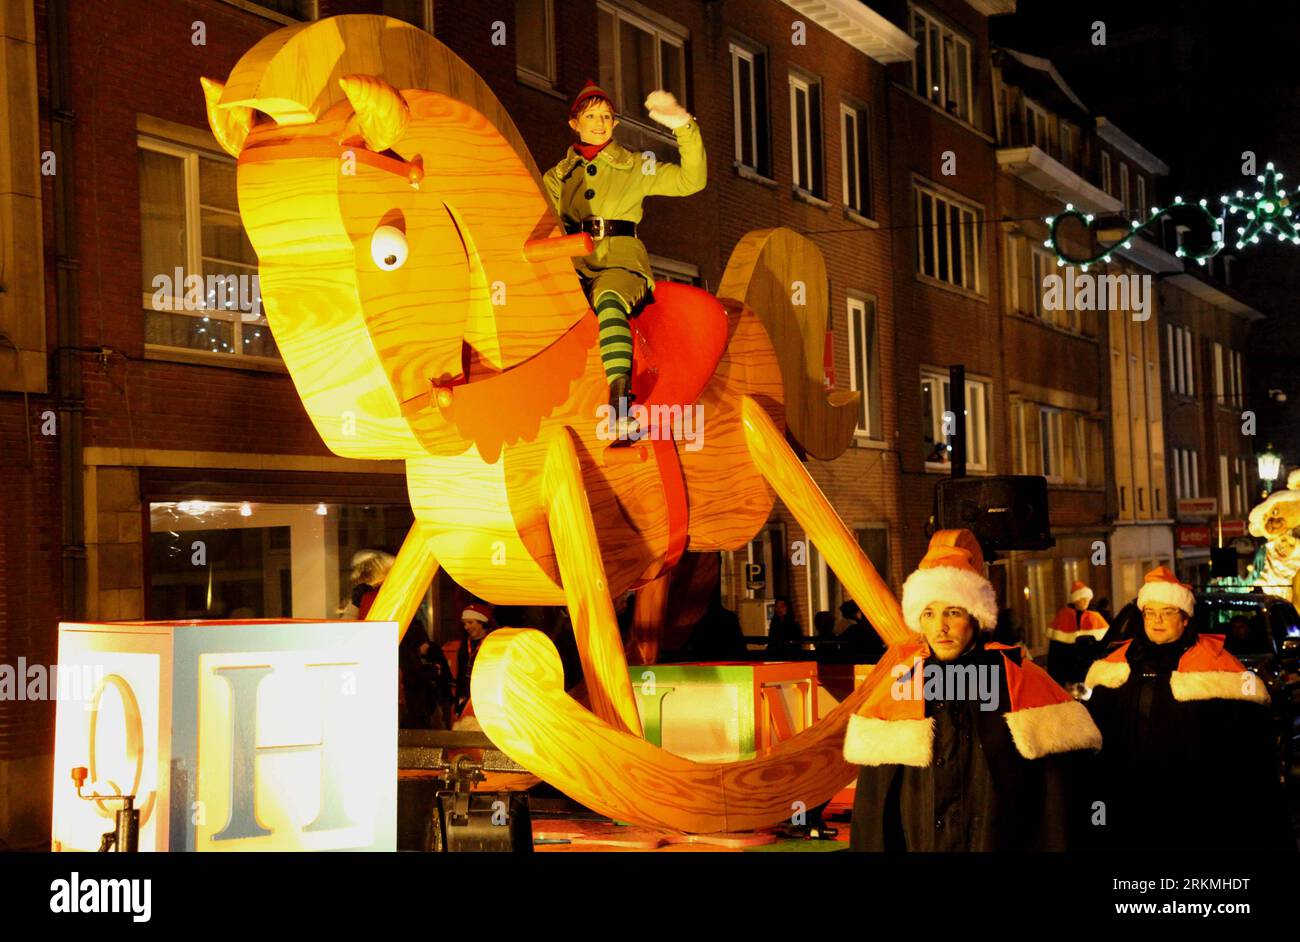 Bildnummer: 56754248  Datum: 17.12.2011  Copyright: imago/Xinhua (111218) -- NIVELLES, Dec. 18, 2011 (Xinhua) -- A rocking horse float takes part in the Christmas float parade held in Nivelles, Belgium, Dec. 17, 2011. About 14 floats offered performance and candies to local residents and tourists Saturday night at the Christmas float parade in Nivelles. (Xinhua/Wang Xiaojun) (axy) BELGIUM-NIVELLES-CHRISTMAS-FLOATS-PARADE PUBLICATIONxNOTxINxCHN Gesellschaft Weihnachten Tradition Strassenparade Strassenumzug Parade Weihnachtsparade premiumd xns x0x 2011 quer      56754248 Date 17 12 2011 Copyrig Stock Photo